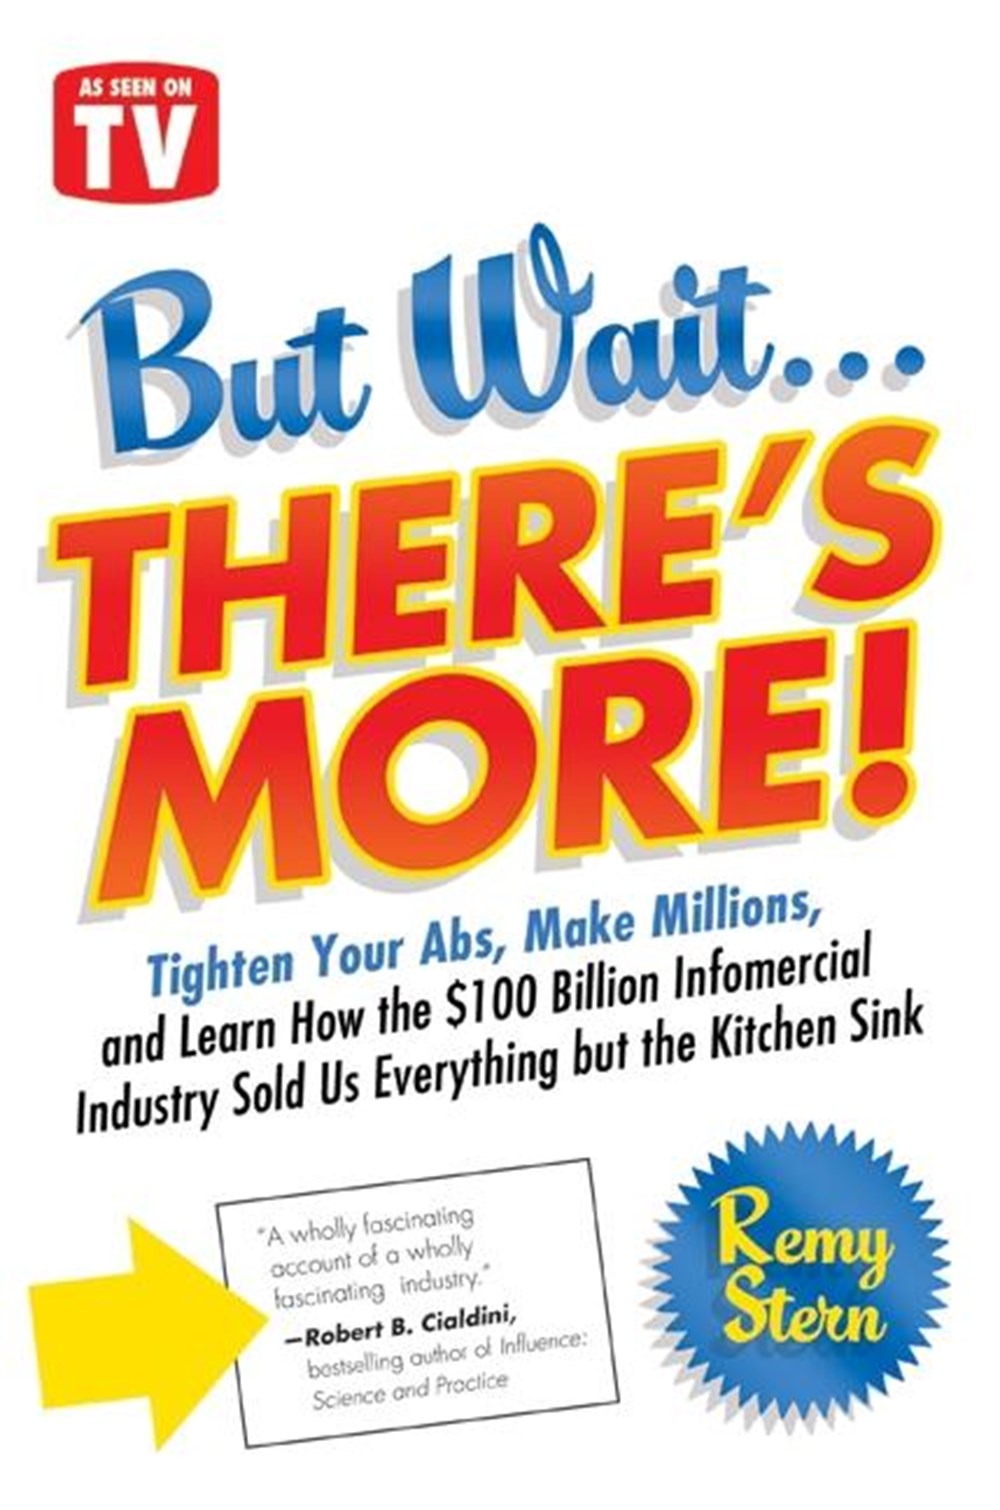 But Wait ... There's More!: Tighten Your Abs, Make Millions, and Learn How the $100 Billion Infomerc